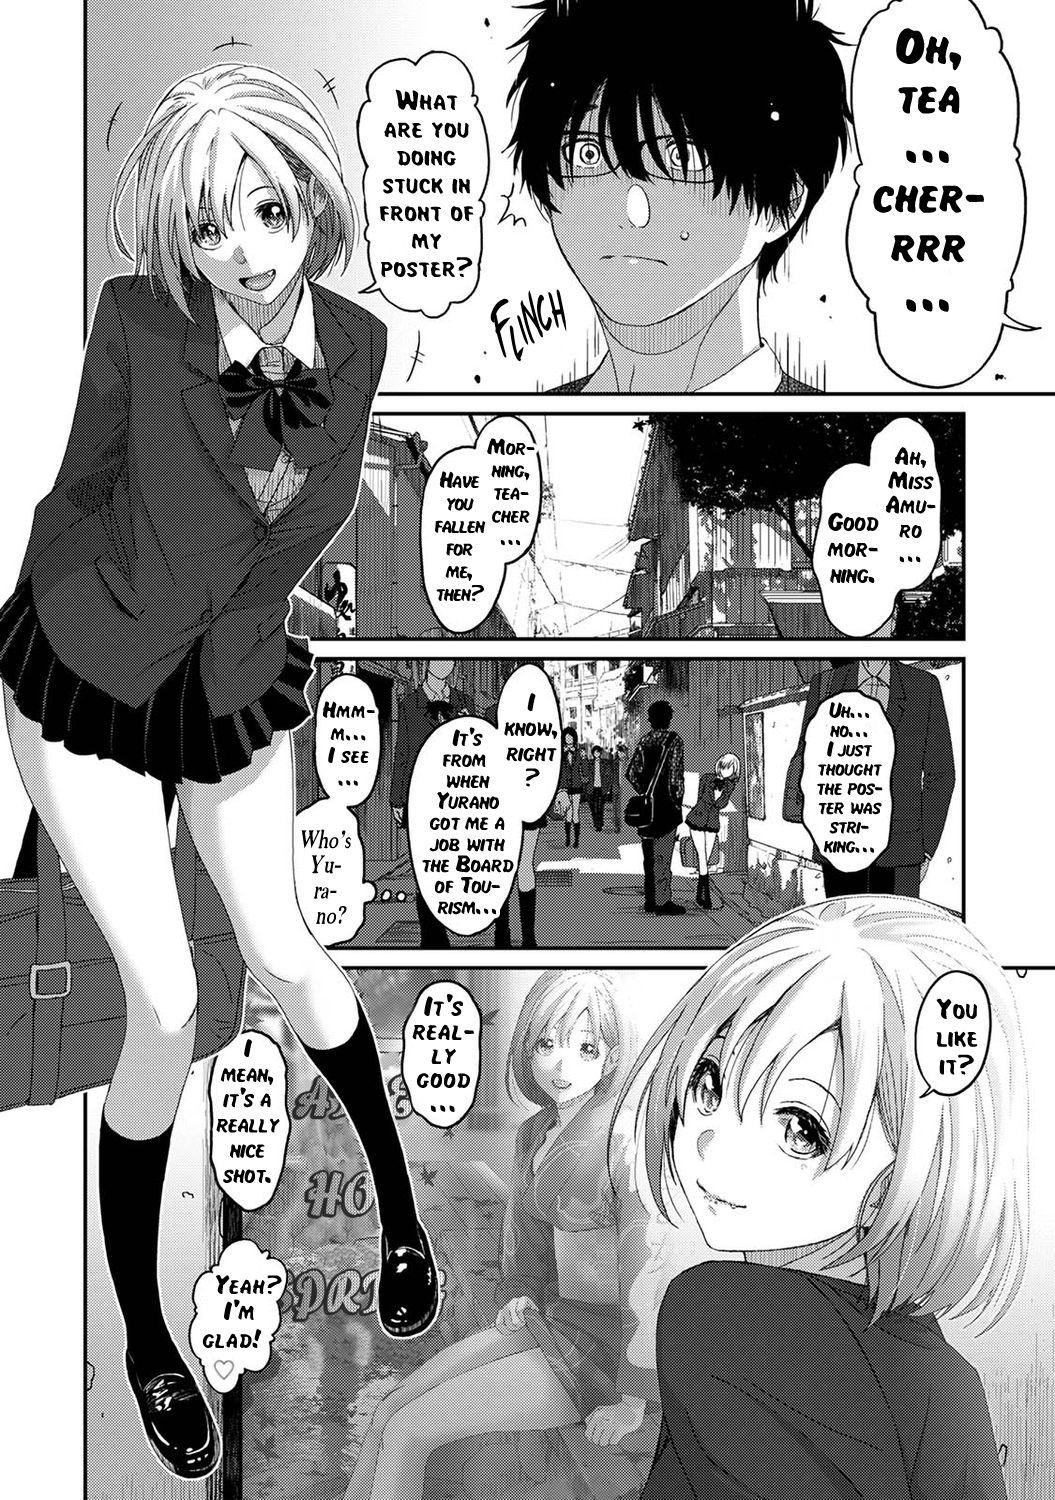 Blowjob Porn Itaiamai - Chapter 1 Blows - Page 3